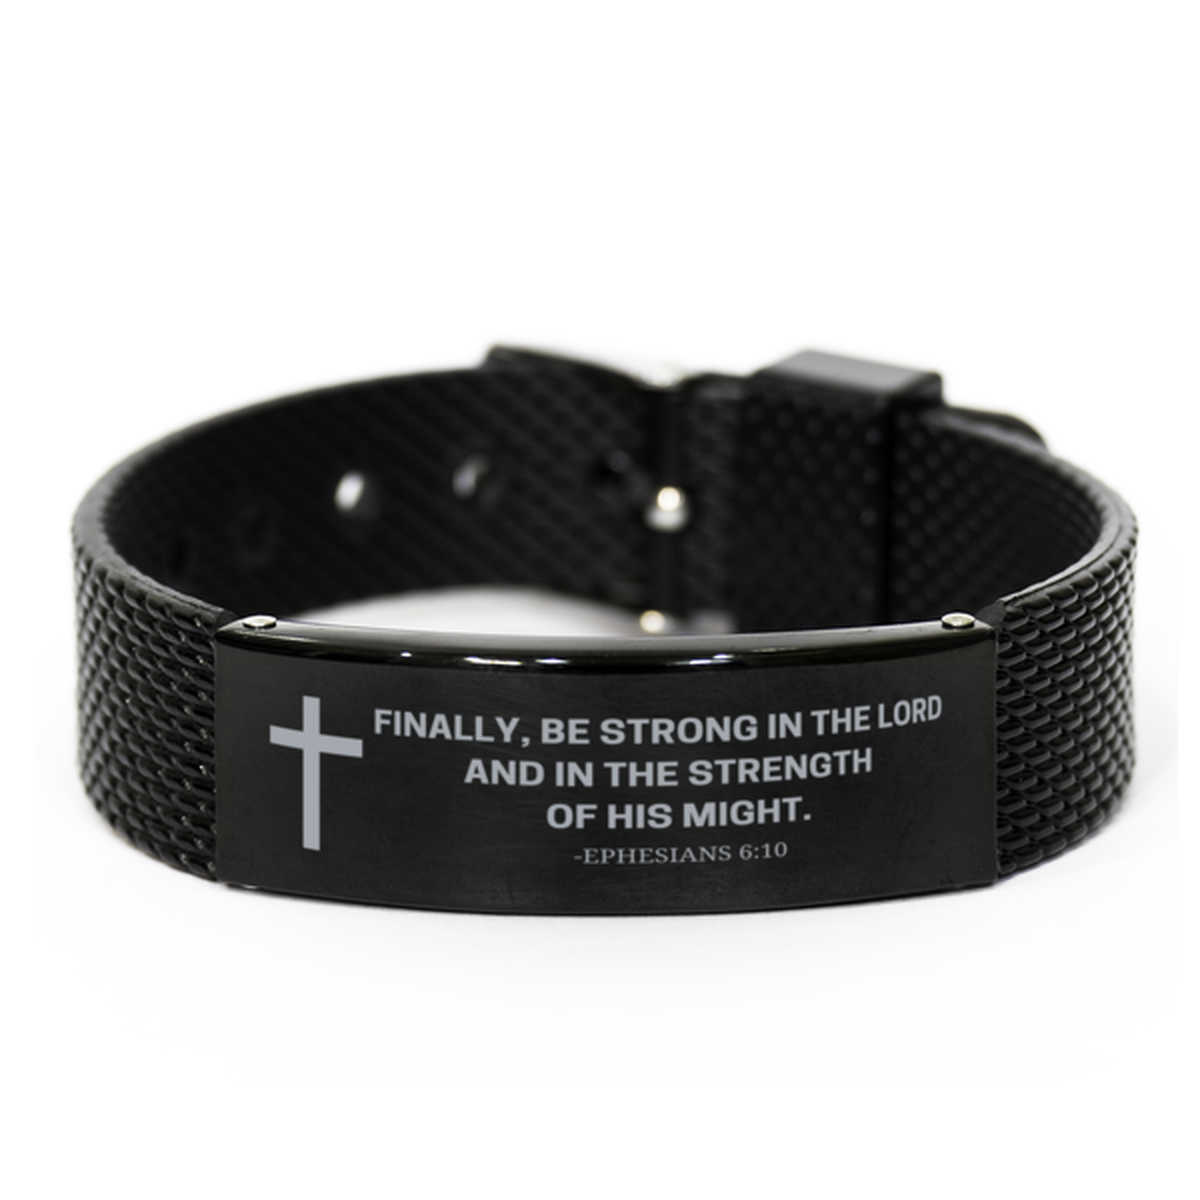 Baptism Gifts For Teenage Boys Girls, Christian Bible Verse Black Shark Mesh Bracelet, Finally, be strong in the Lord Catholic Confirmation Gifts for Son, Godson, Grandson, Nephew